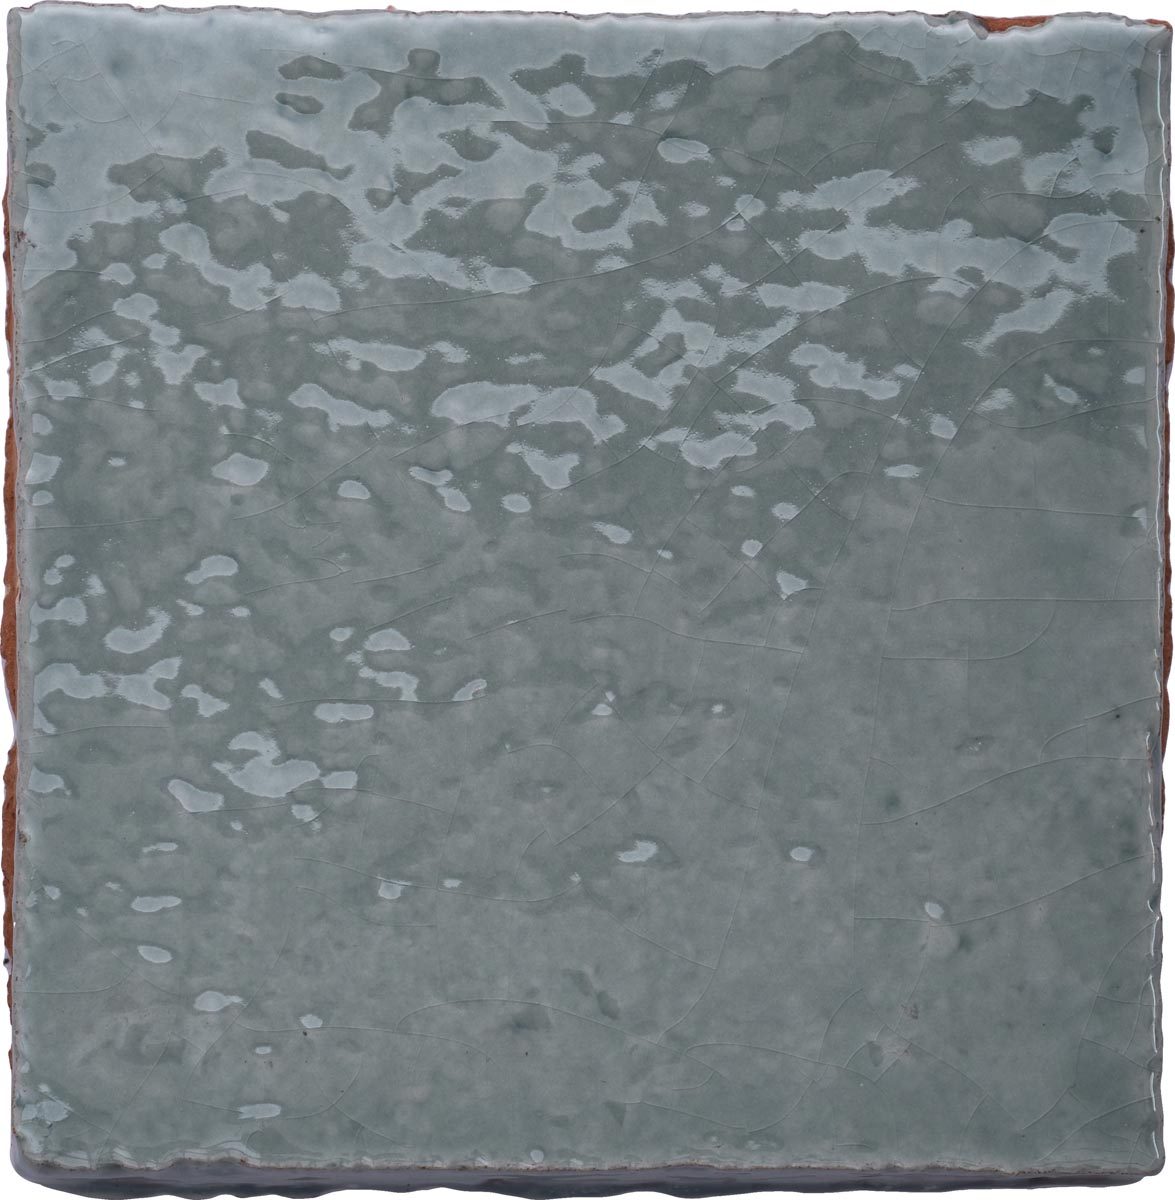 Grace Square, product variant image